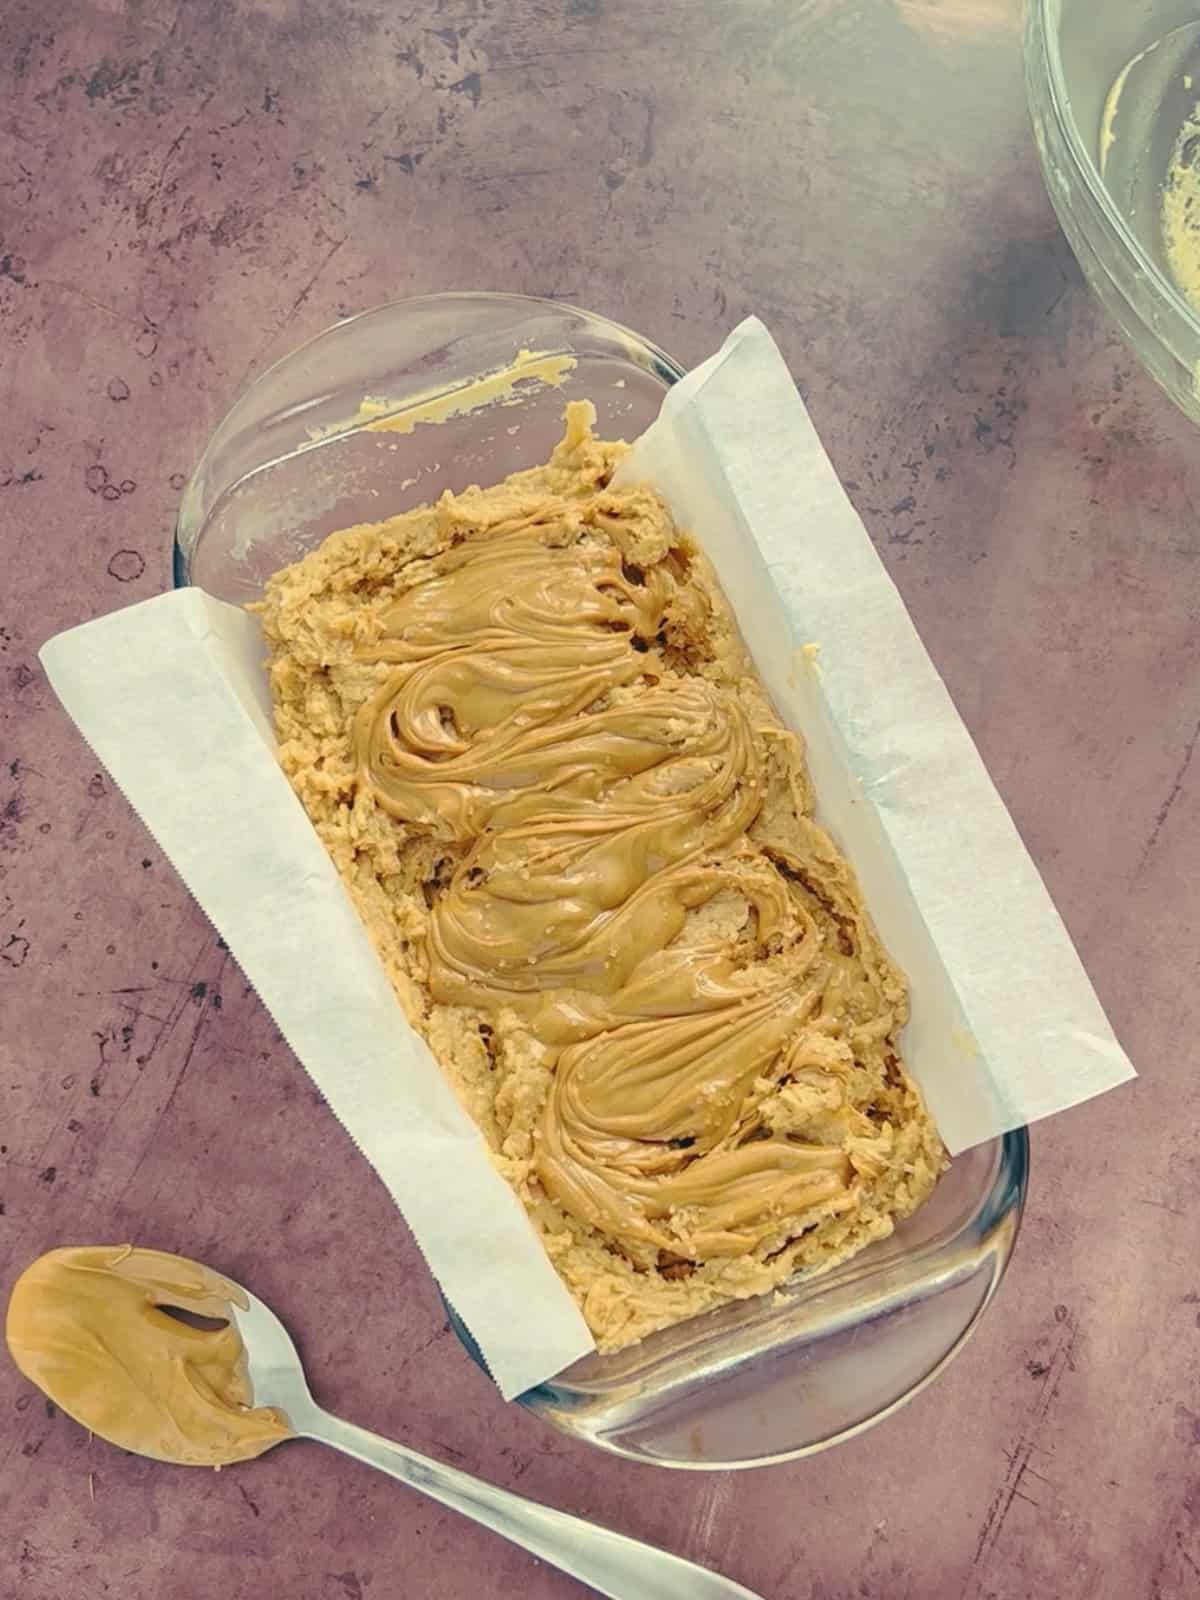 warmed peanut butter is swirled on top of the bread batter before baking.